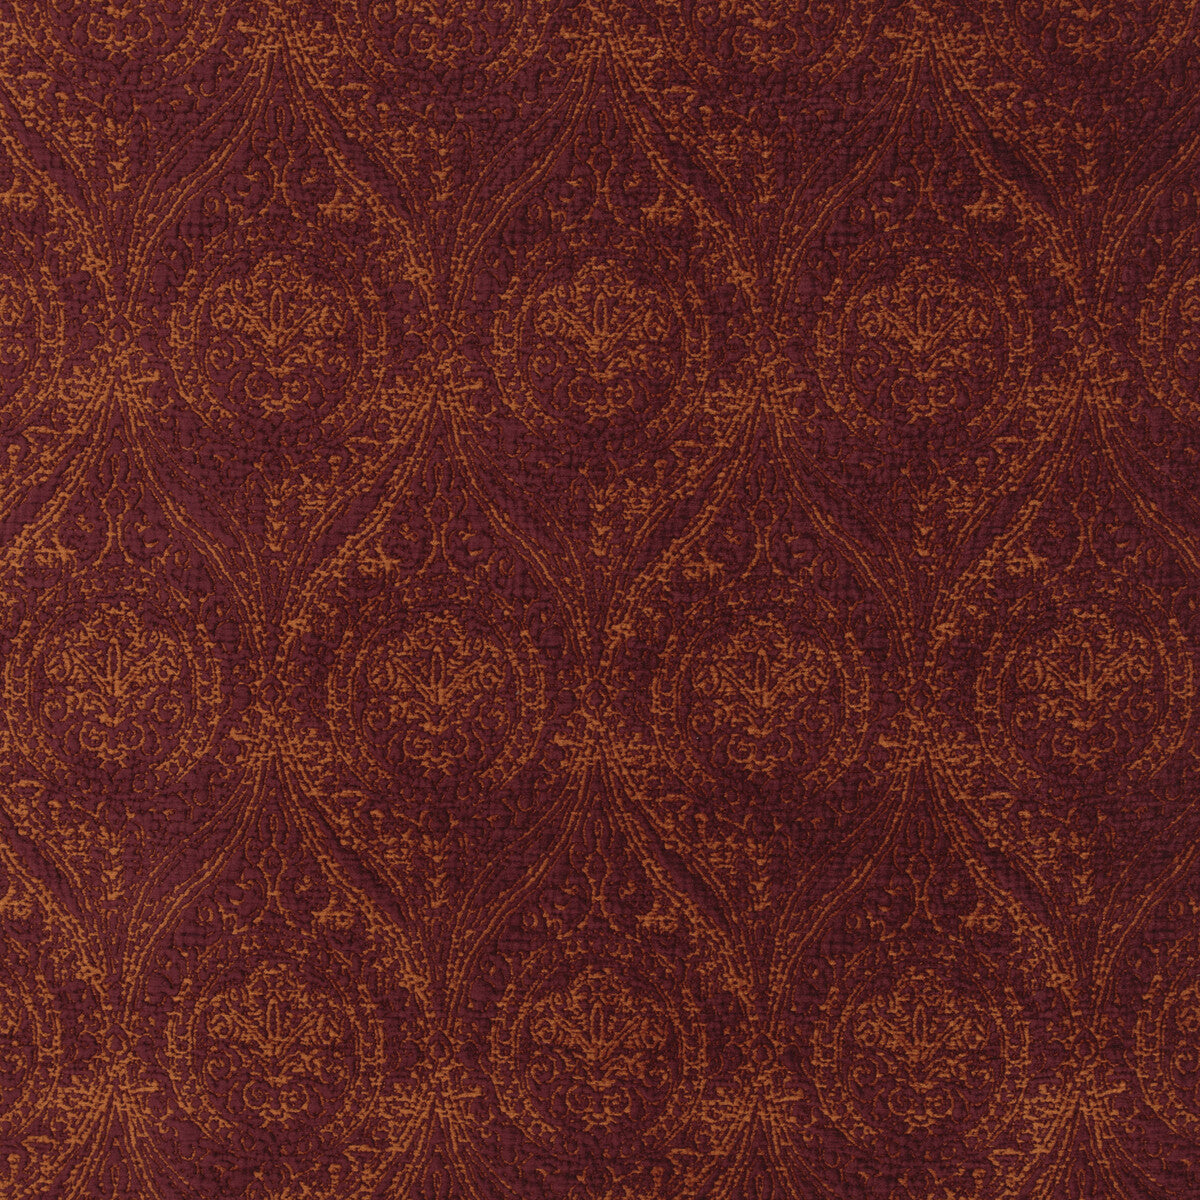 Wolsey fabric in garnet color - pattern BF10654.3.0 - by G P &amp; J Baker in the Historic Royal Palaces collection